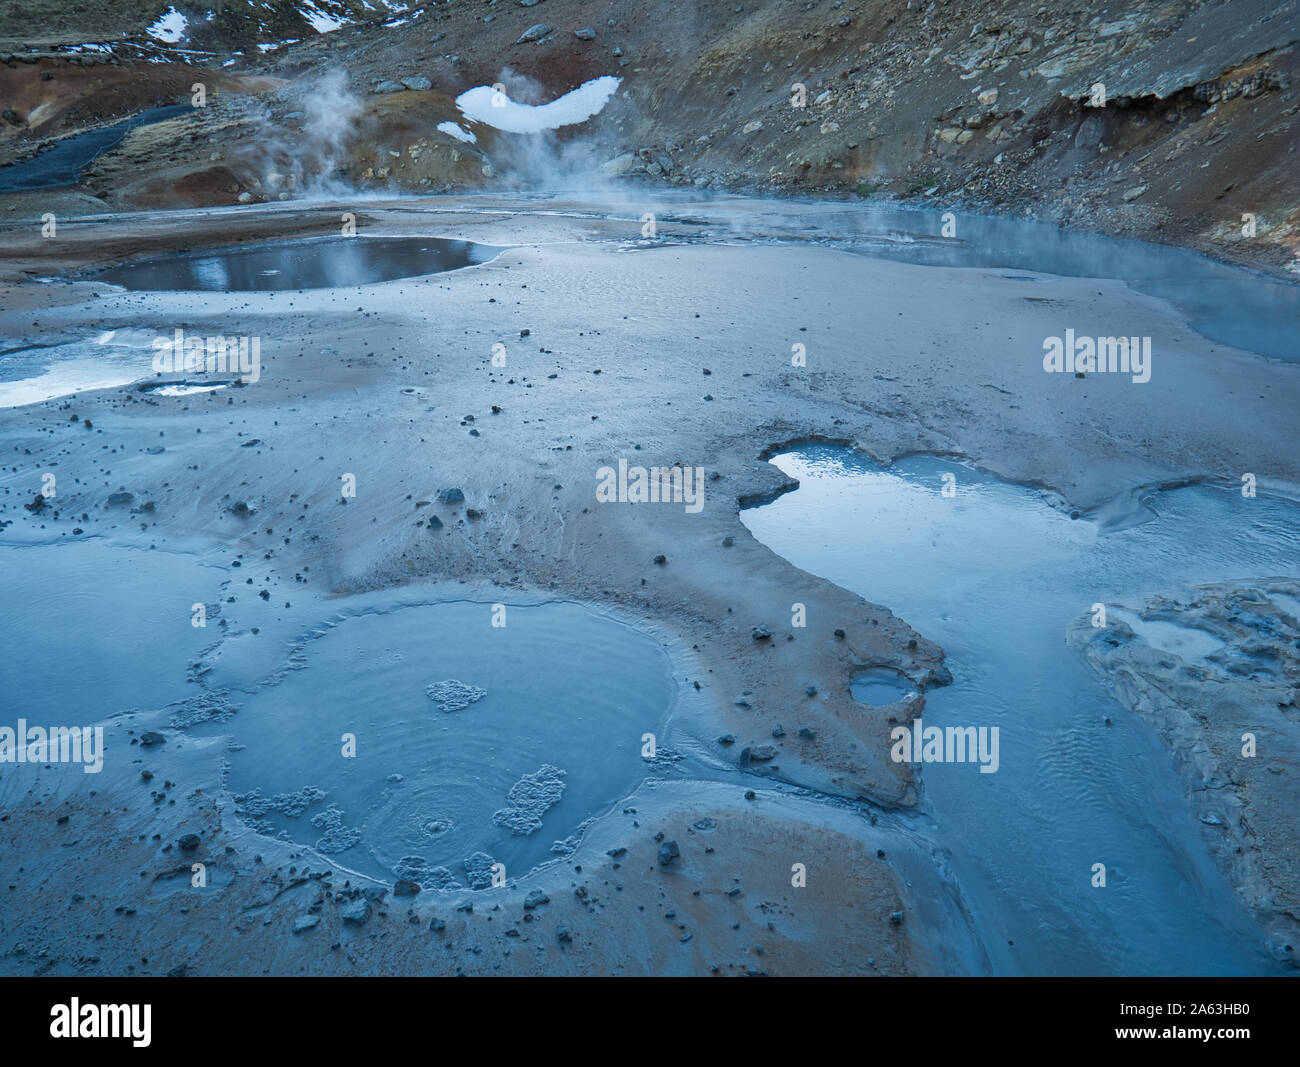 Mud hole in active geothermal area of Iceland at dusk Stock Photo